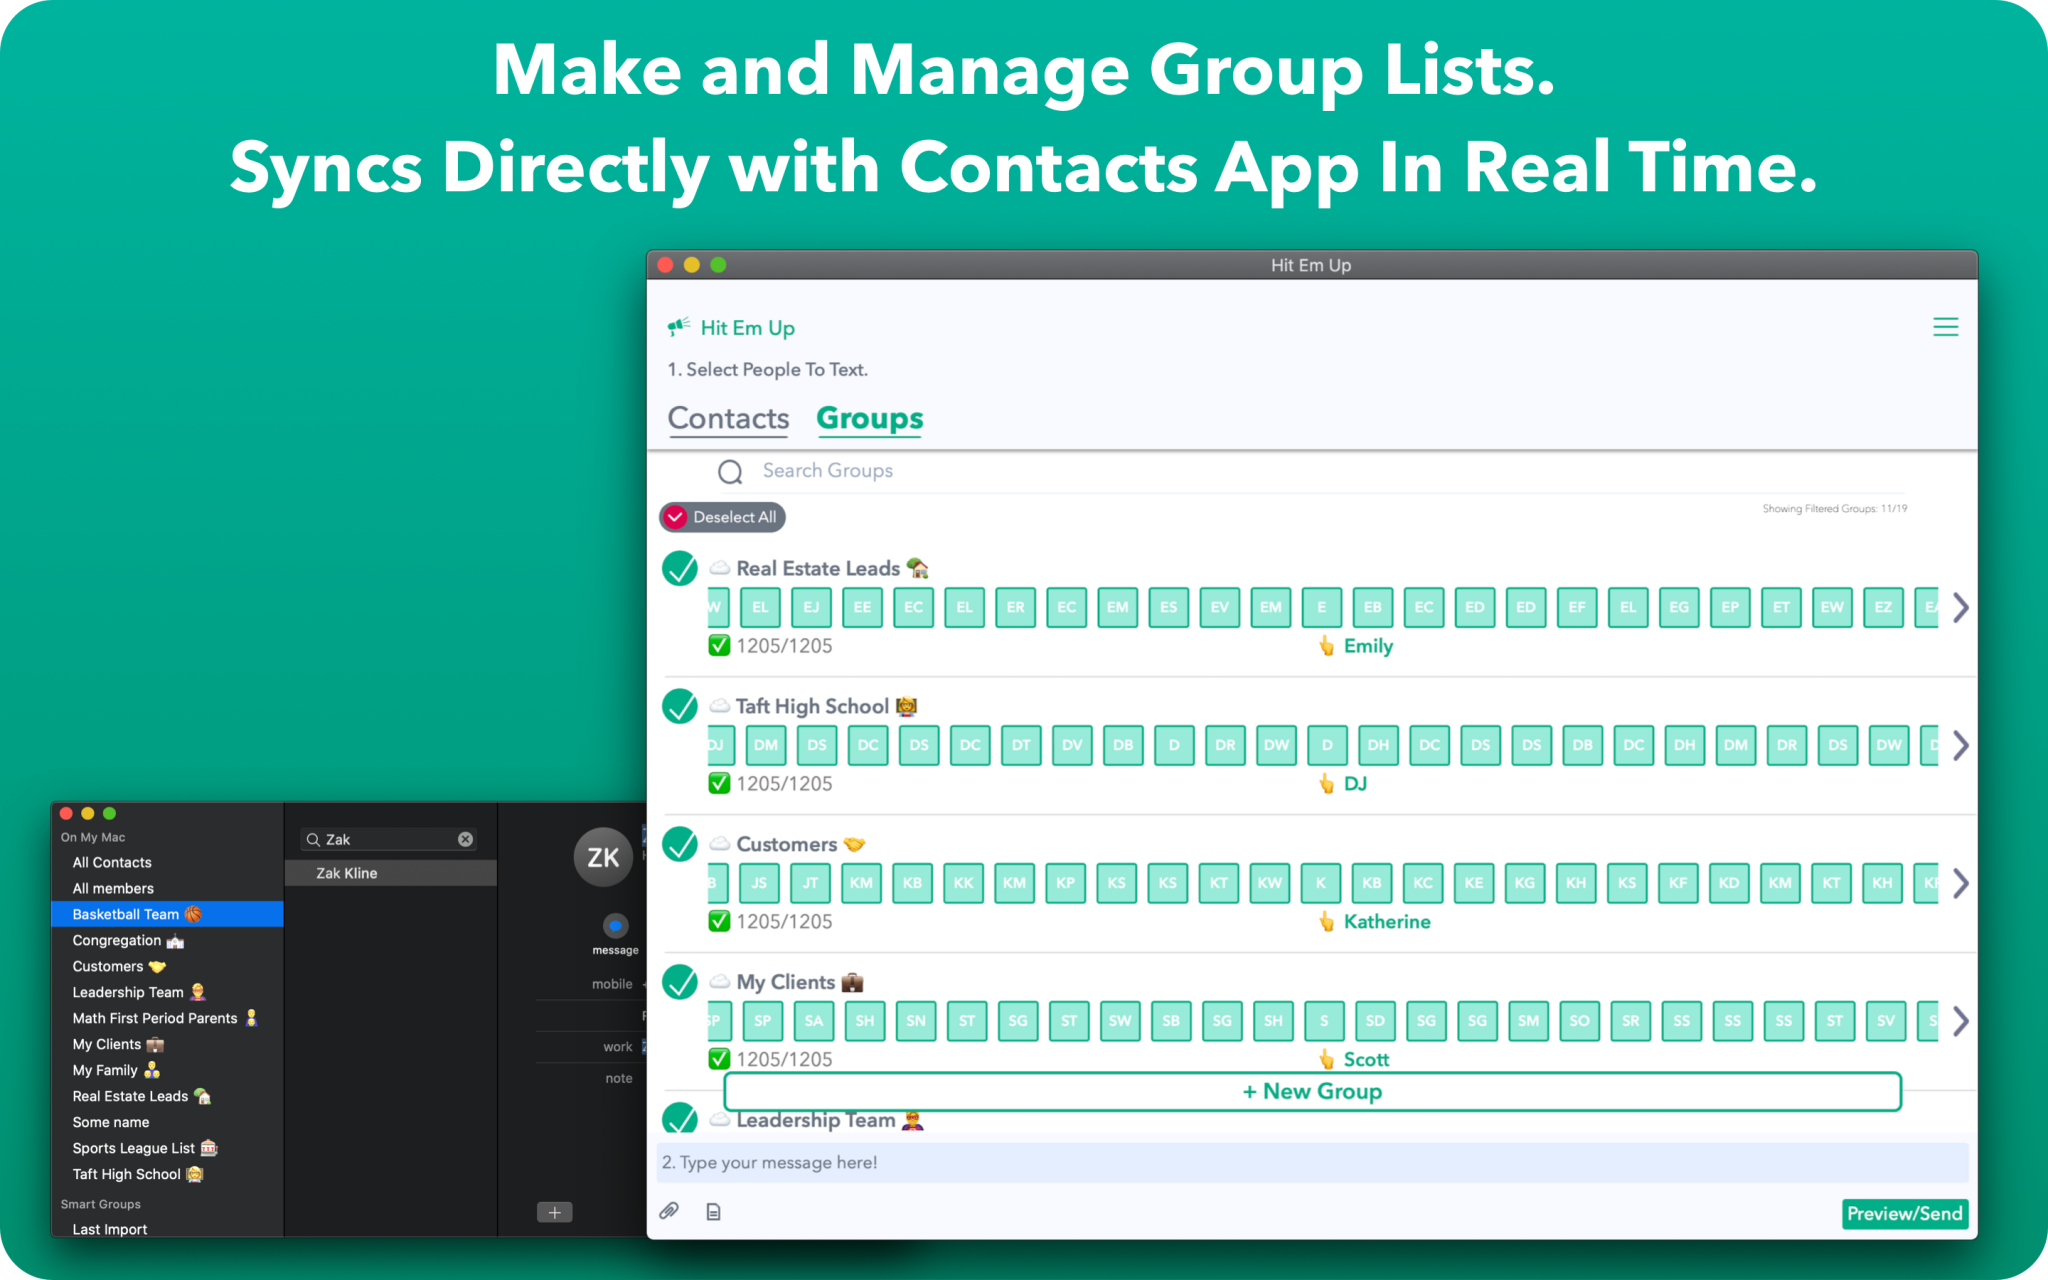 Contact-Contacts-Manager-Mac-iPhone-iPad-Sync-Mass-Text-Repeater-SMS-Message-Messaging-Group-Bulk-iCloud-Cloud-No-Reply-All